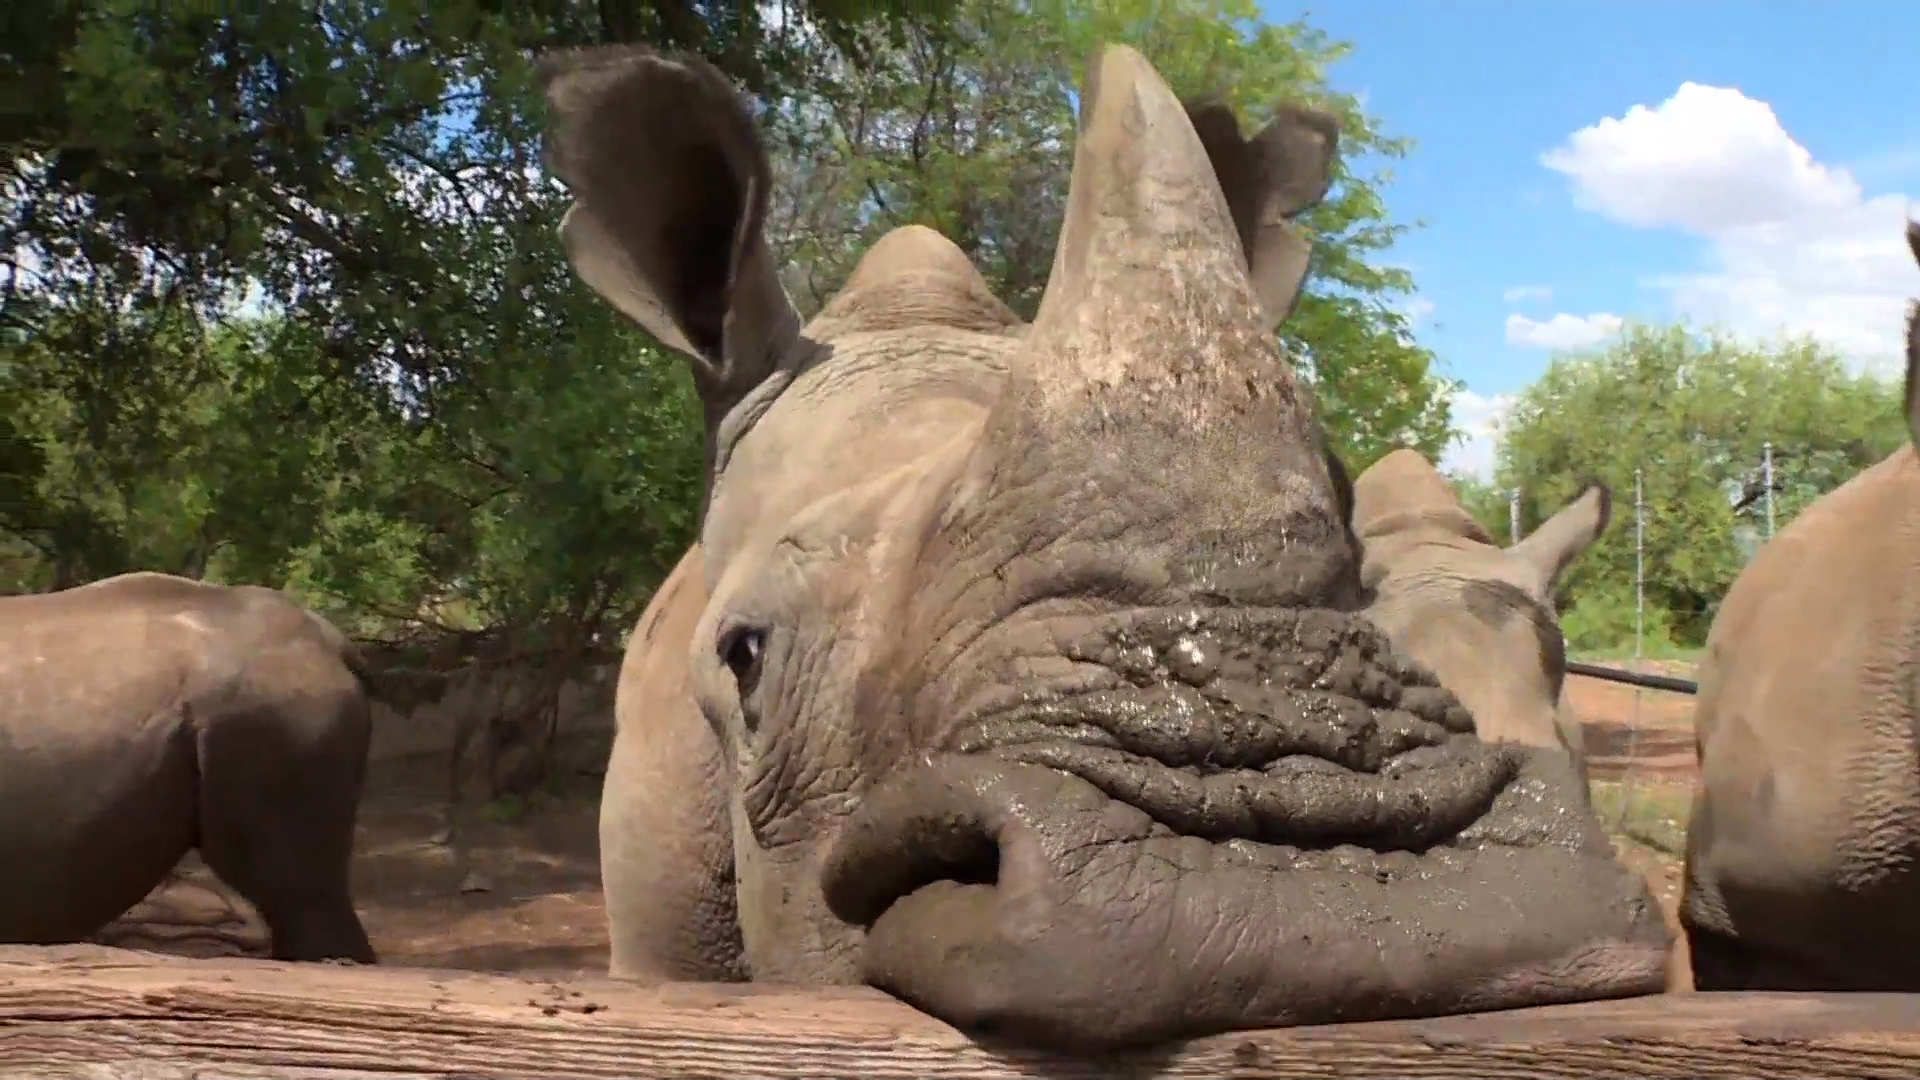 Can You Save Rhinos By Selling Their Horns?